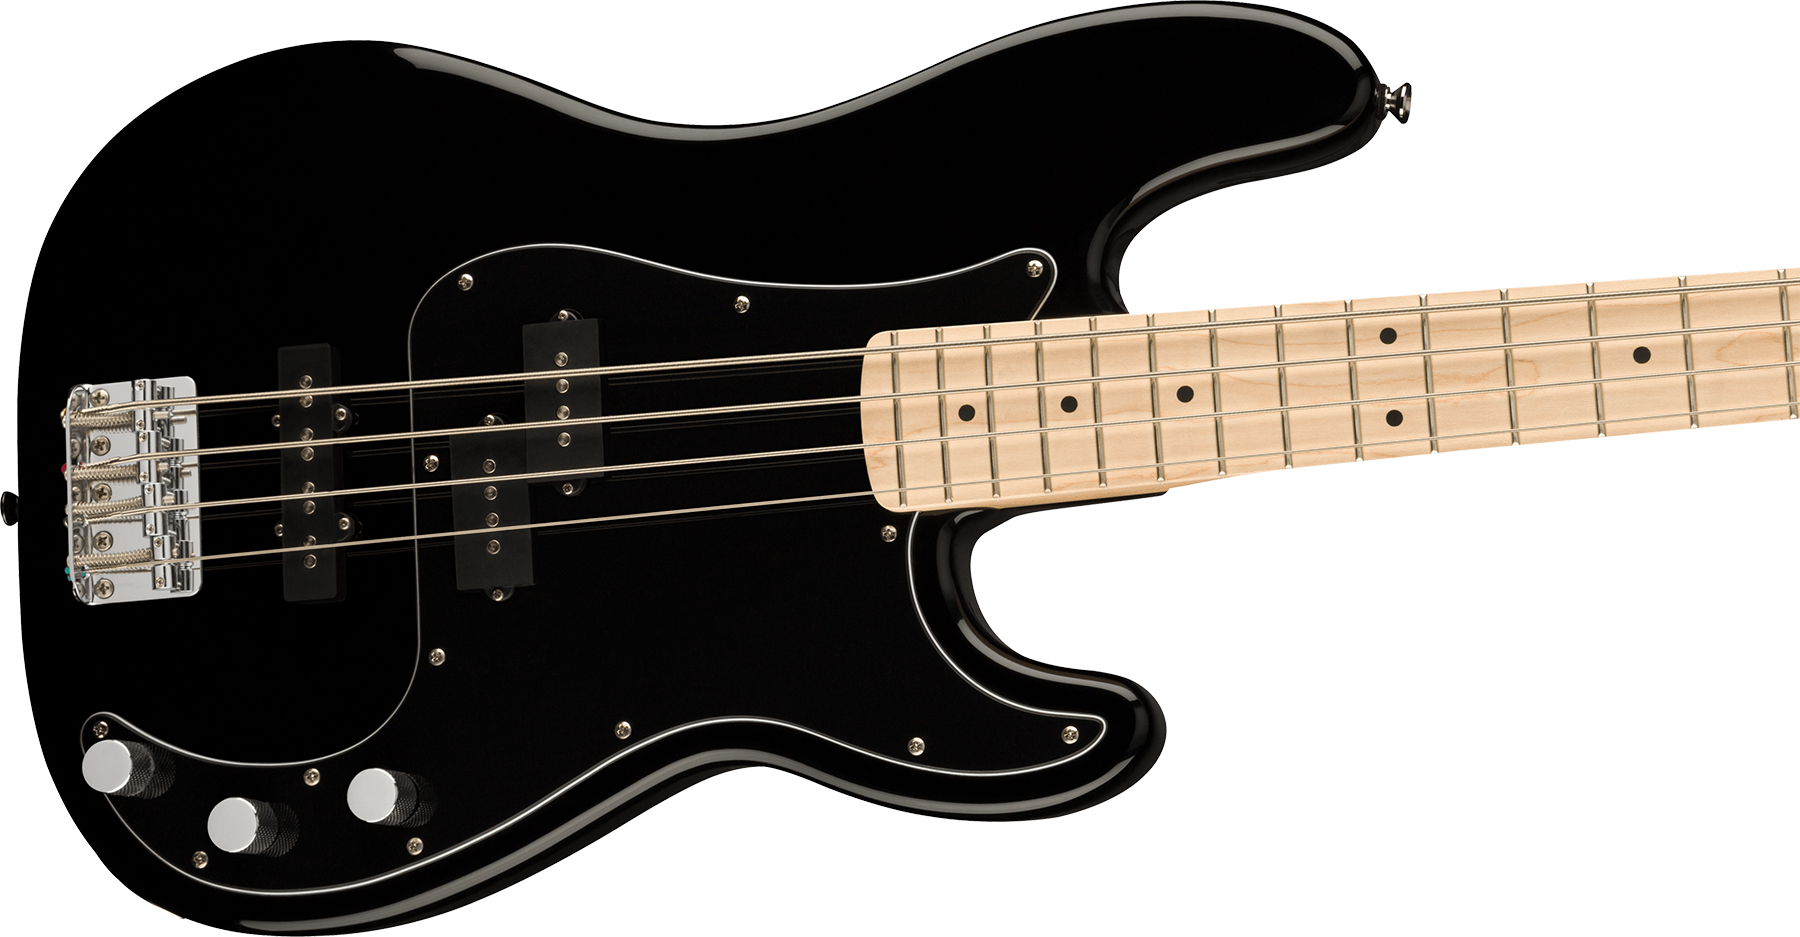 Squier Precision Bass Affinity Pj 2021 Mn - Black - Solid body electric bass - Variation 2